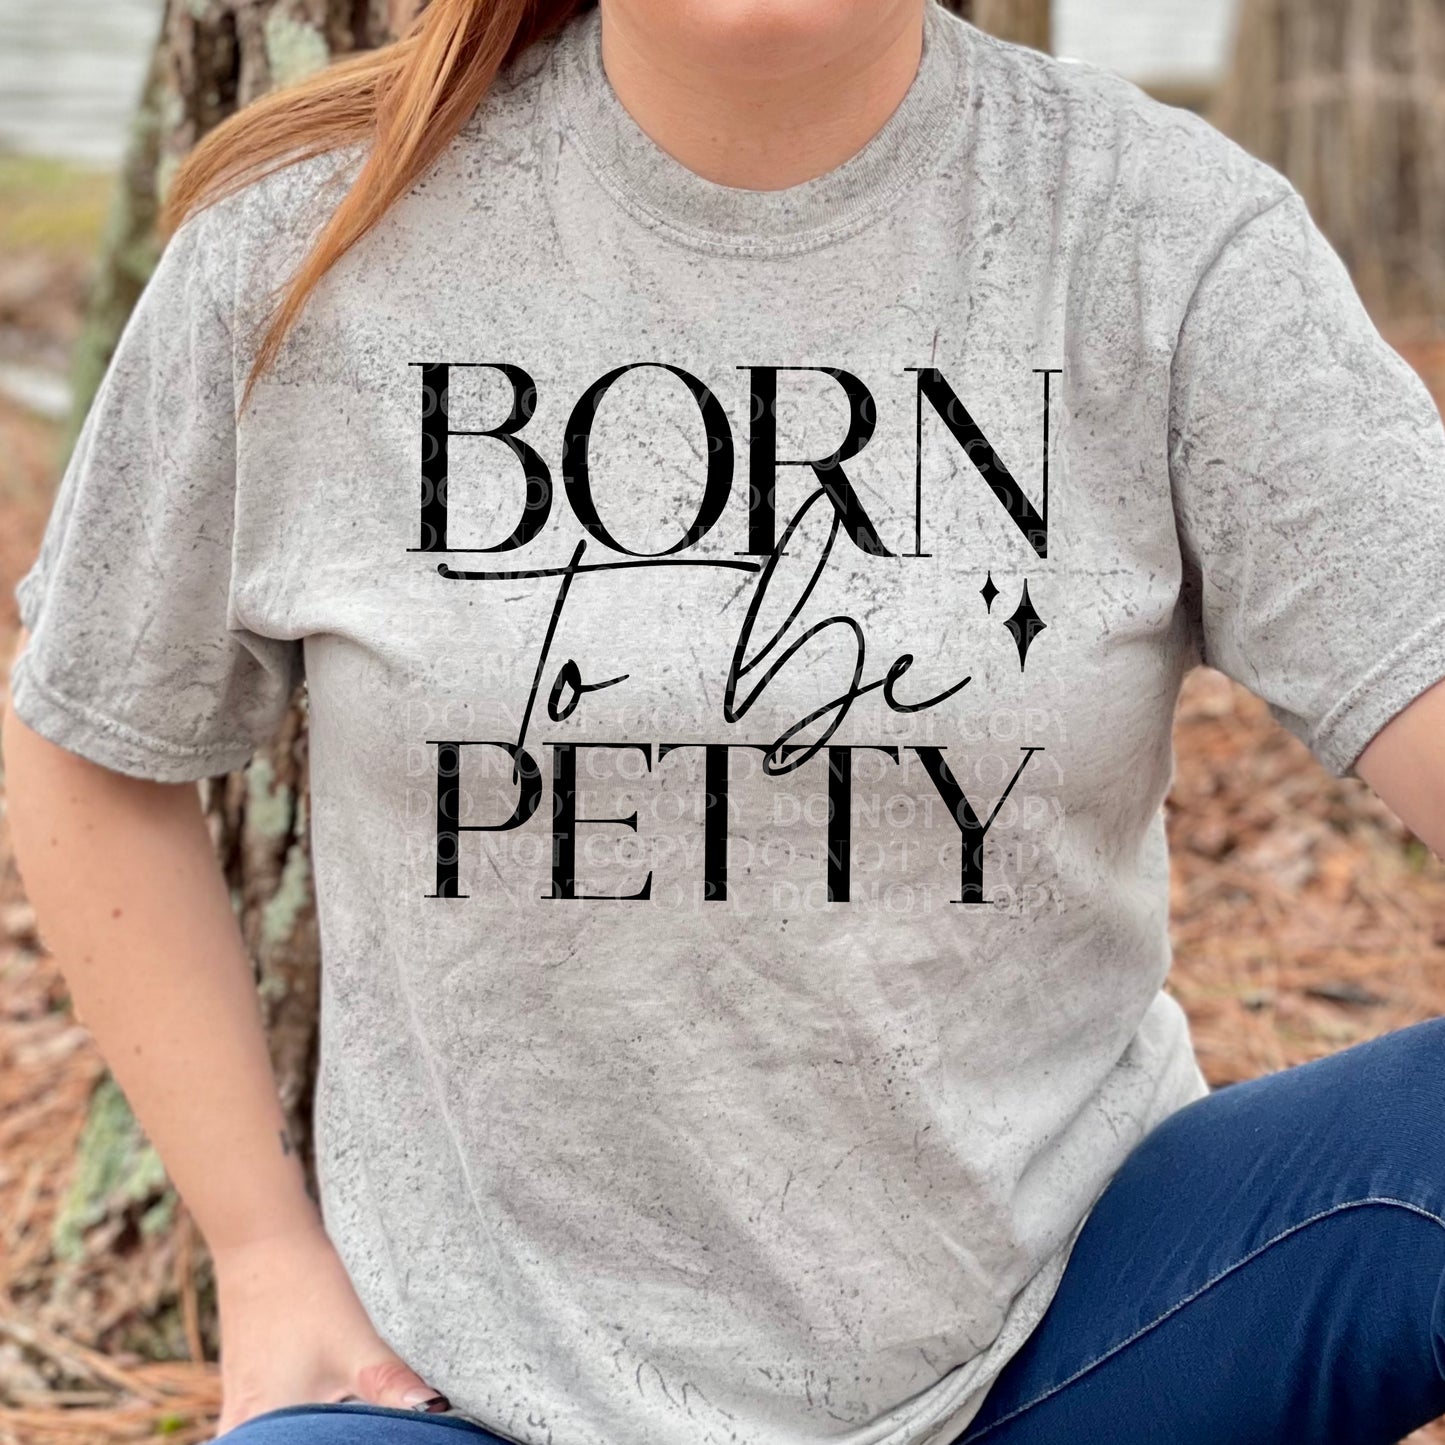 Born to be petty